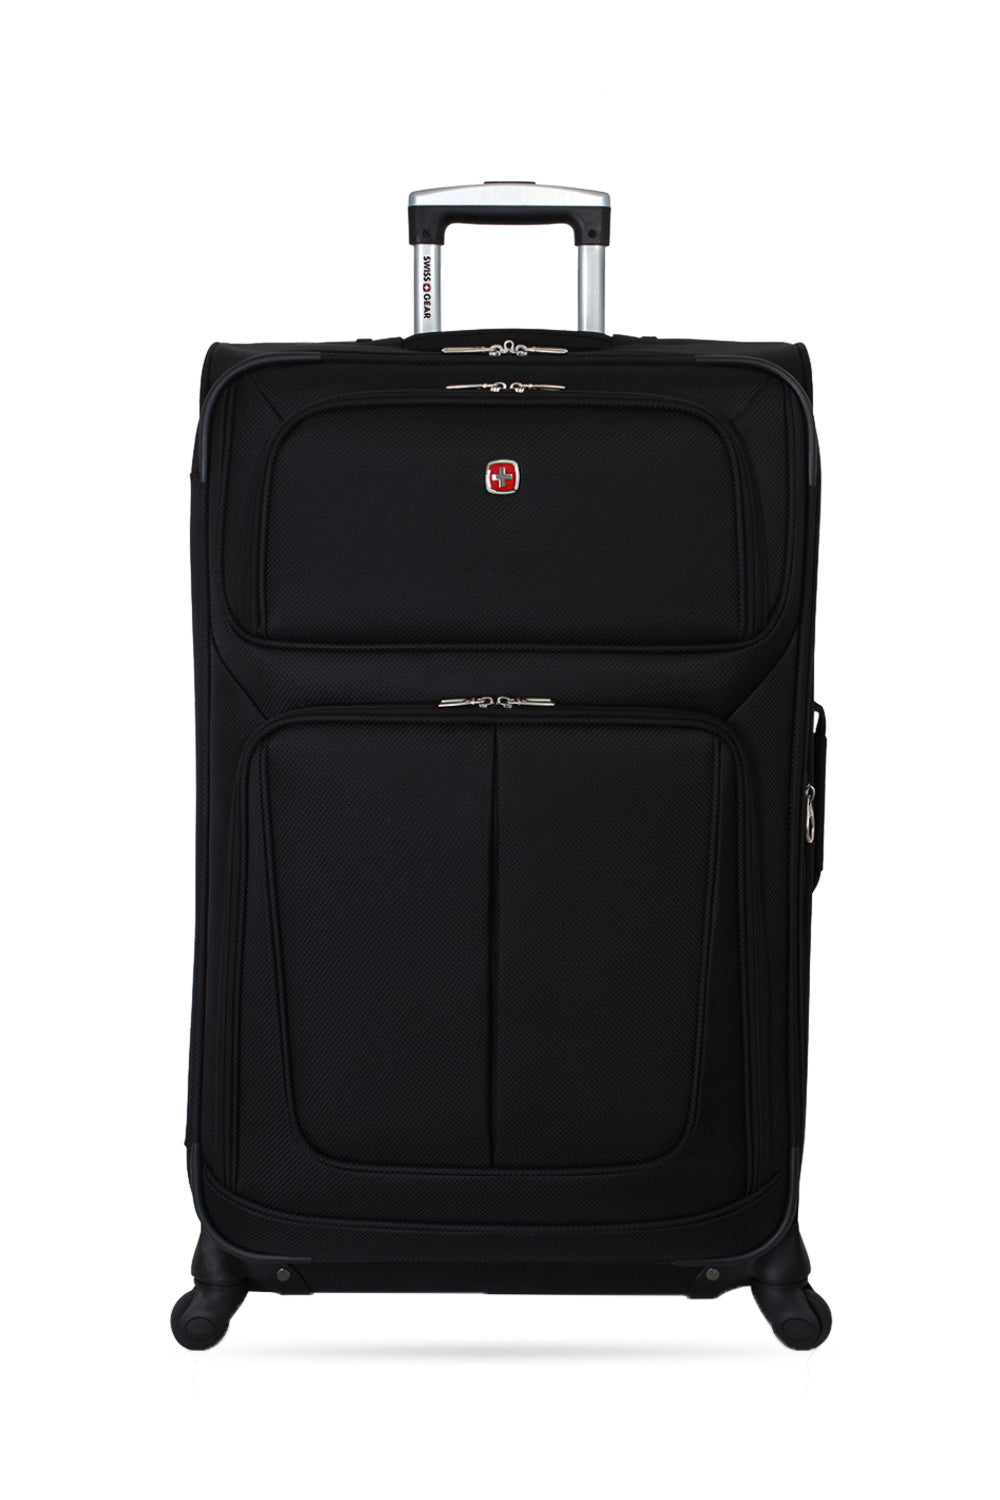 Swissgear 6283 29" Expandable Spinner Suitcase